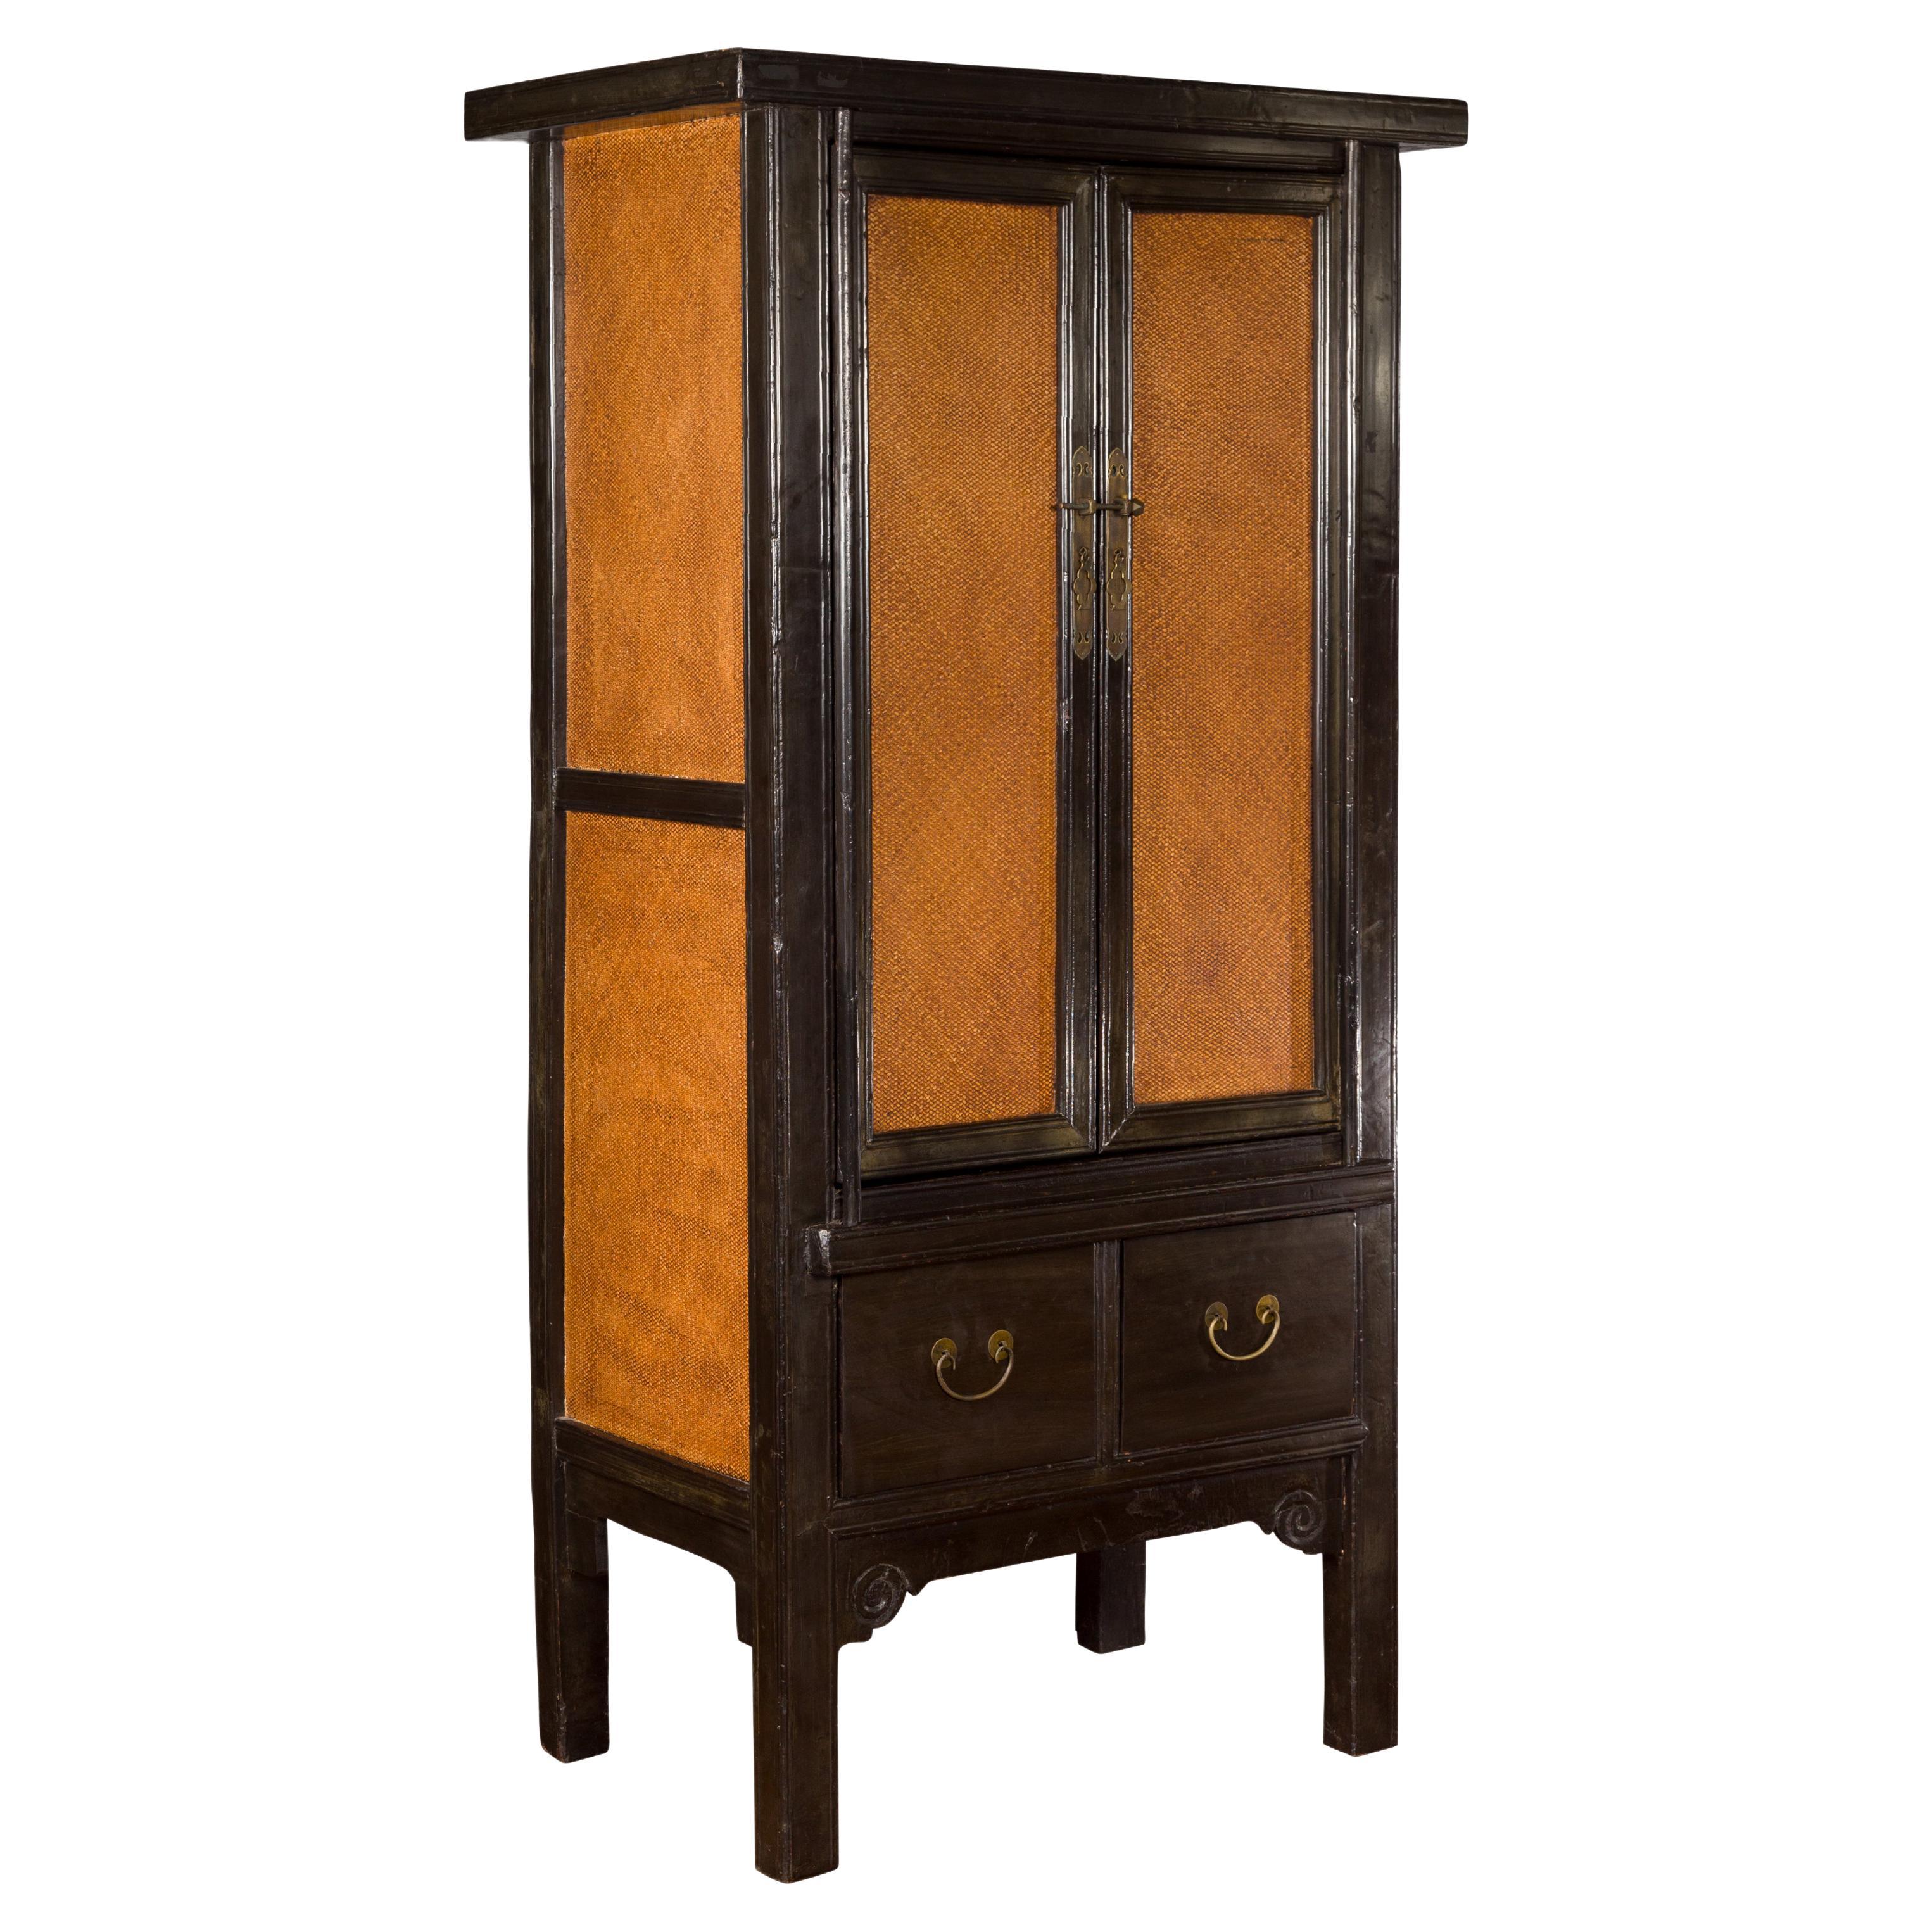 Chinese Early 20th Century Dark Lacquer Cabinet with Rattan Doors and Drawers